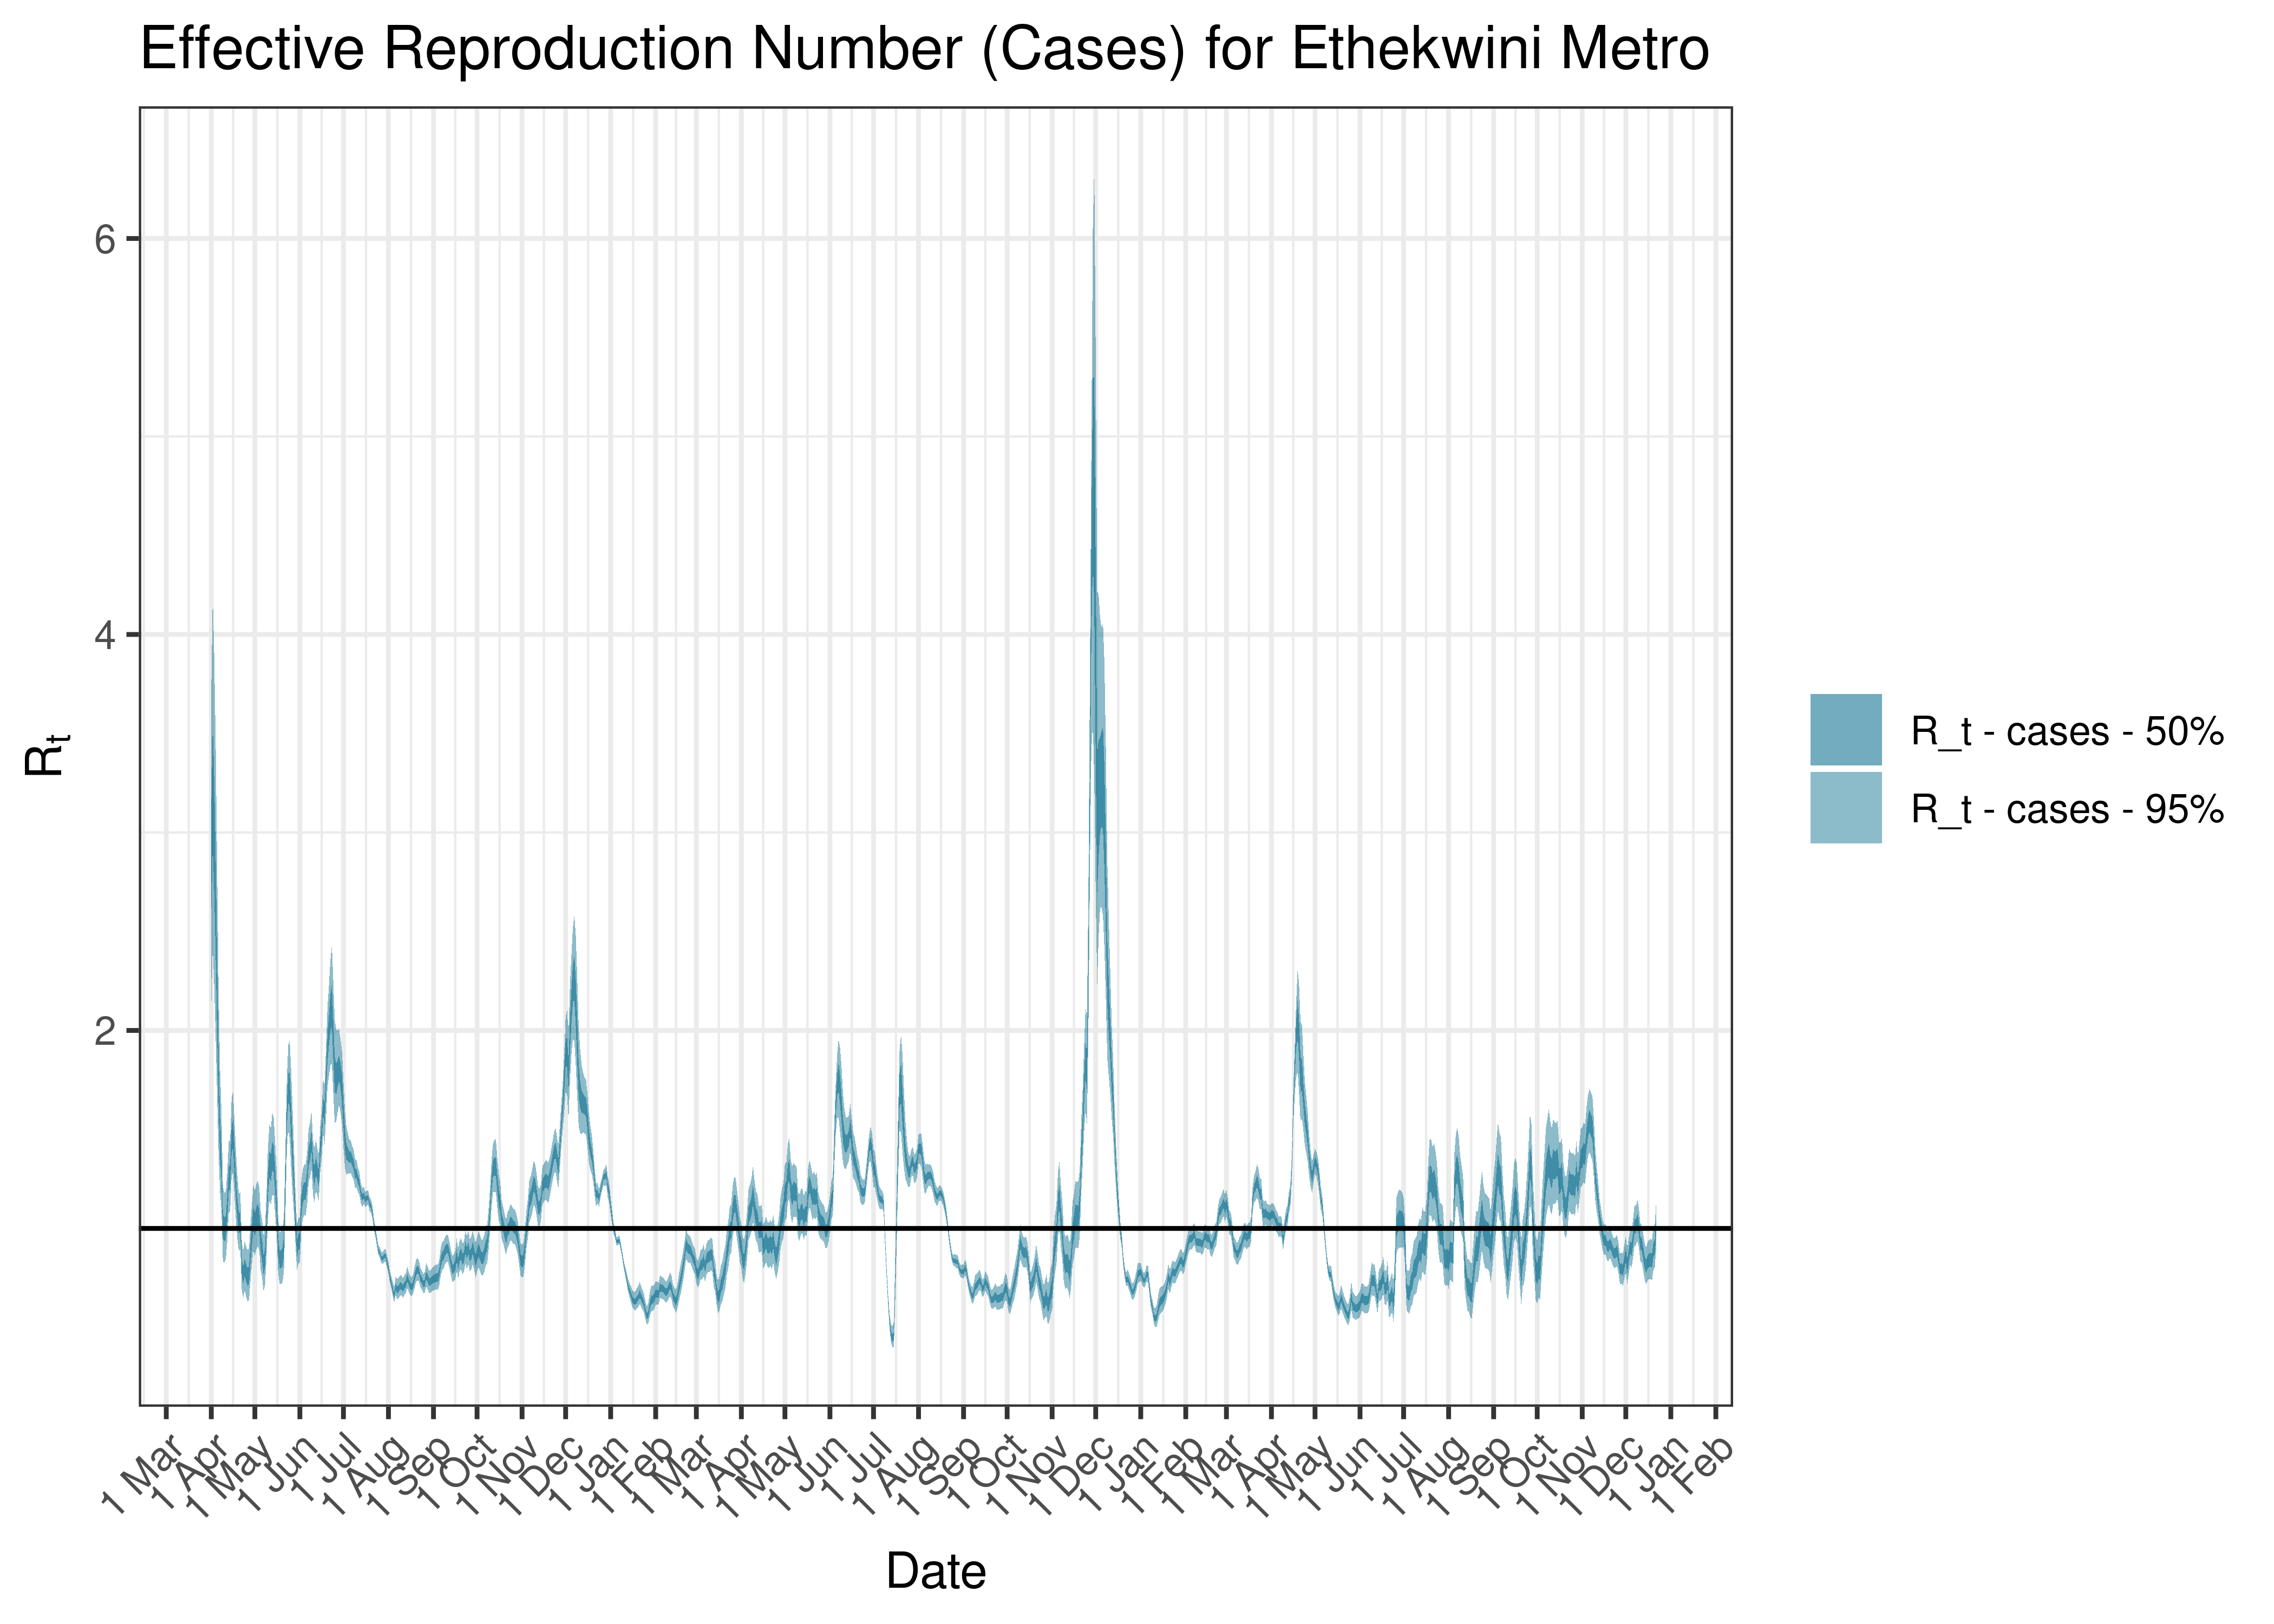 Estimated Effective Reproduction Number Based on Cases for Ethekwini Metro since 1 April 2020